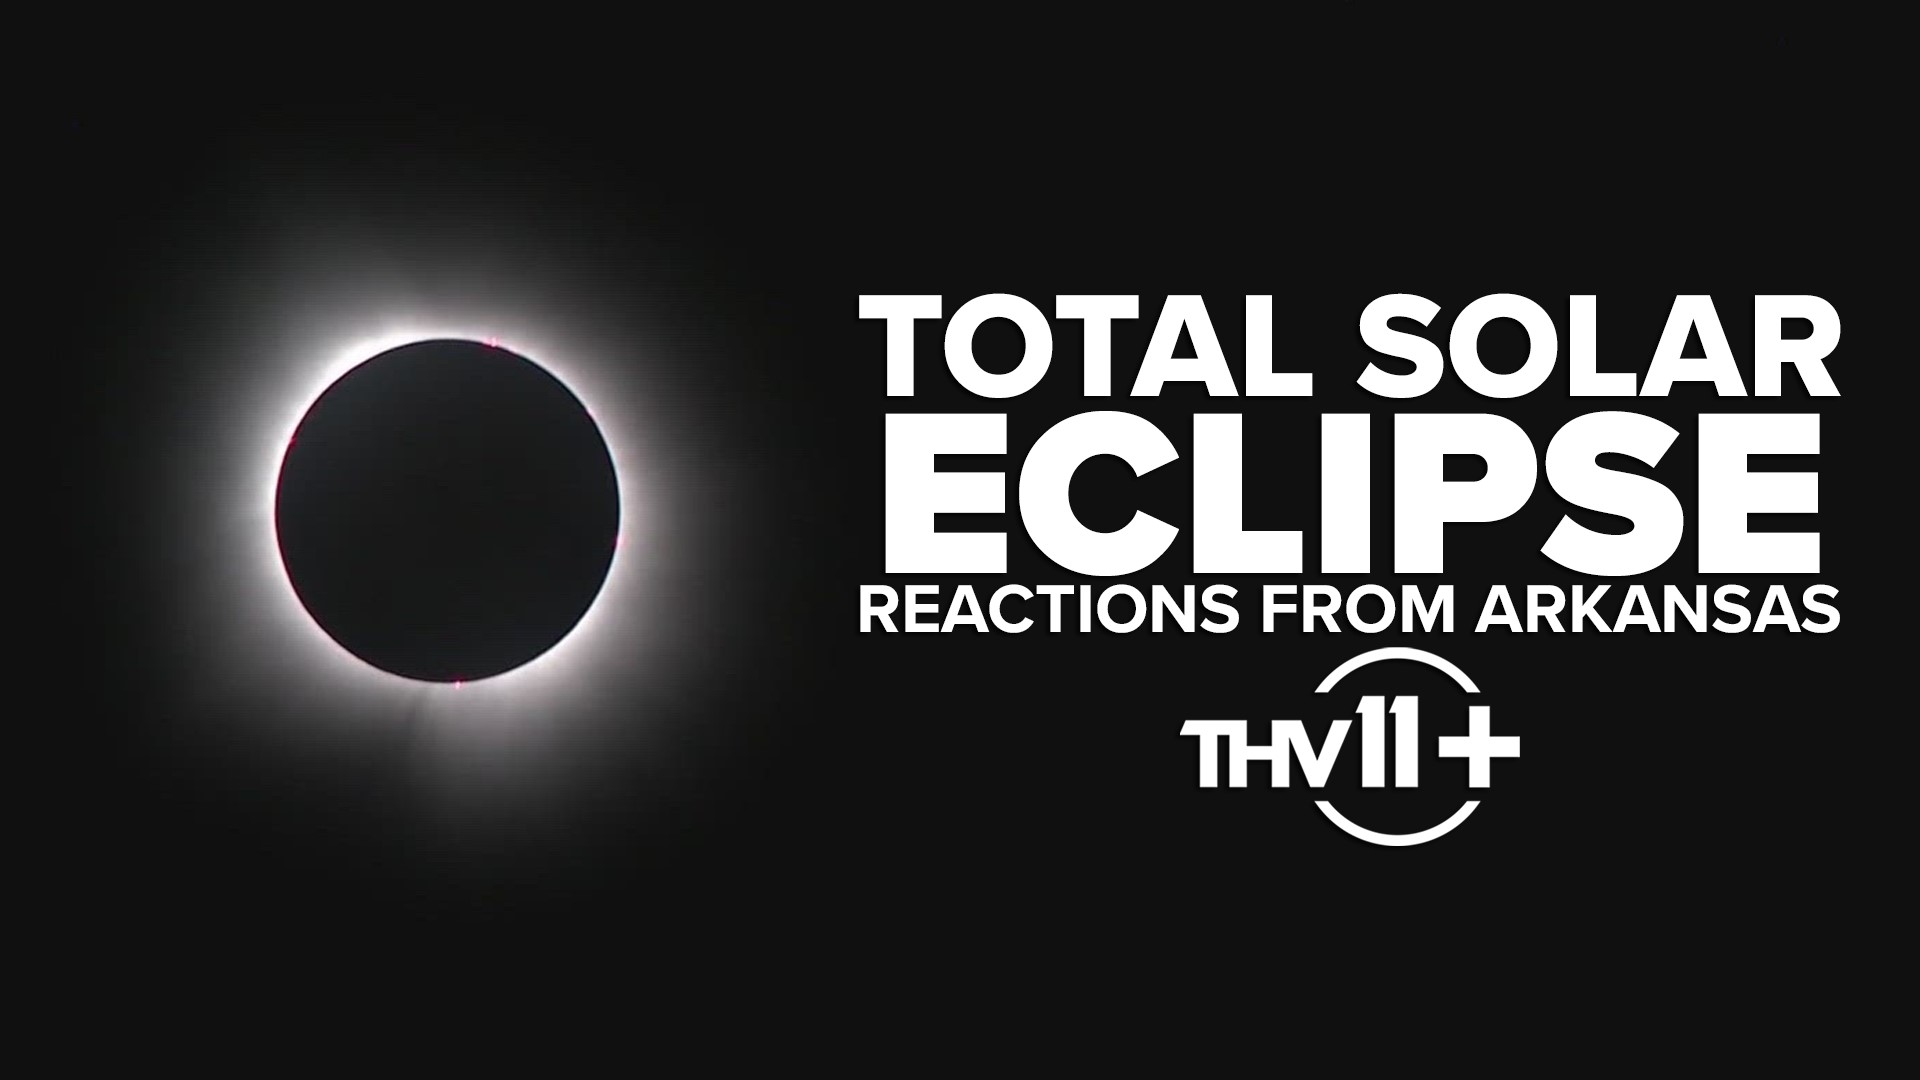 Here's a look at the moment of the 2024 total solar eclipse and reactions from our team and others throughout Arkansas!